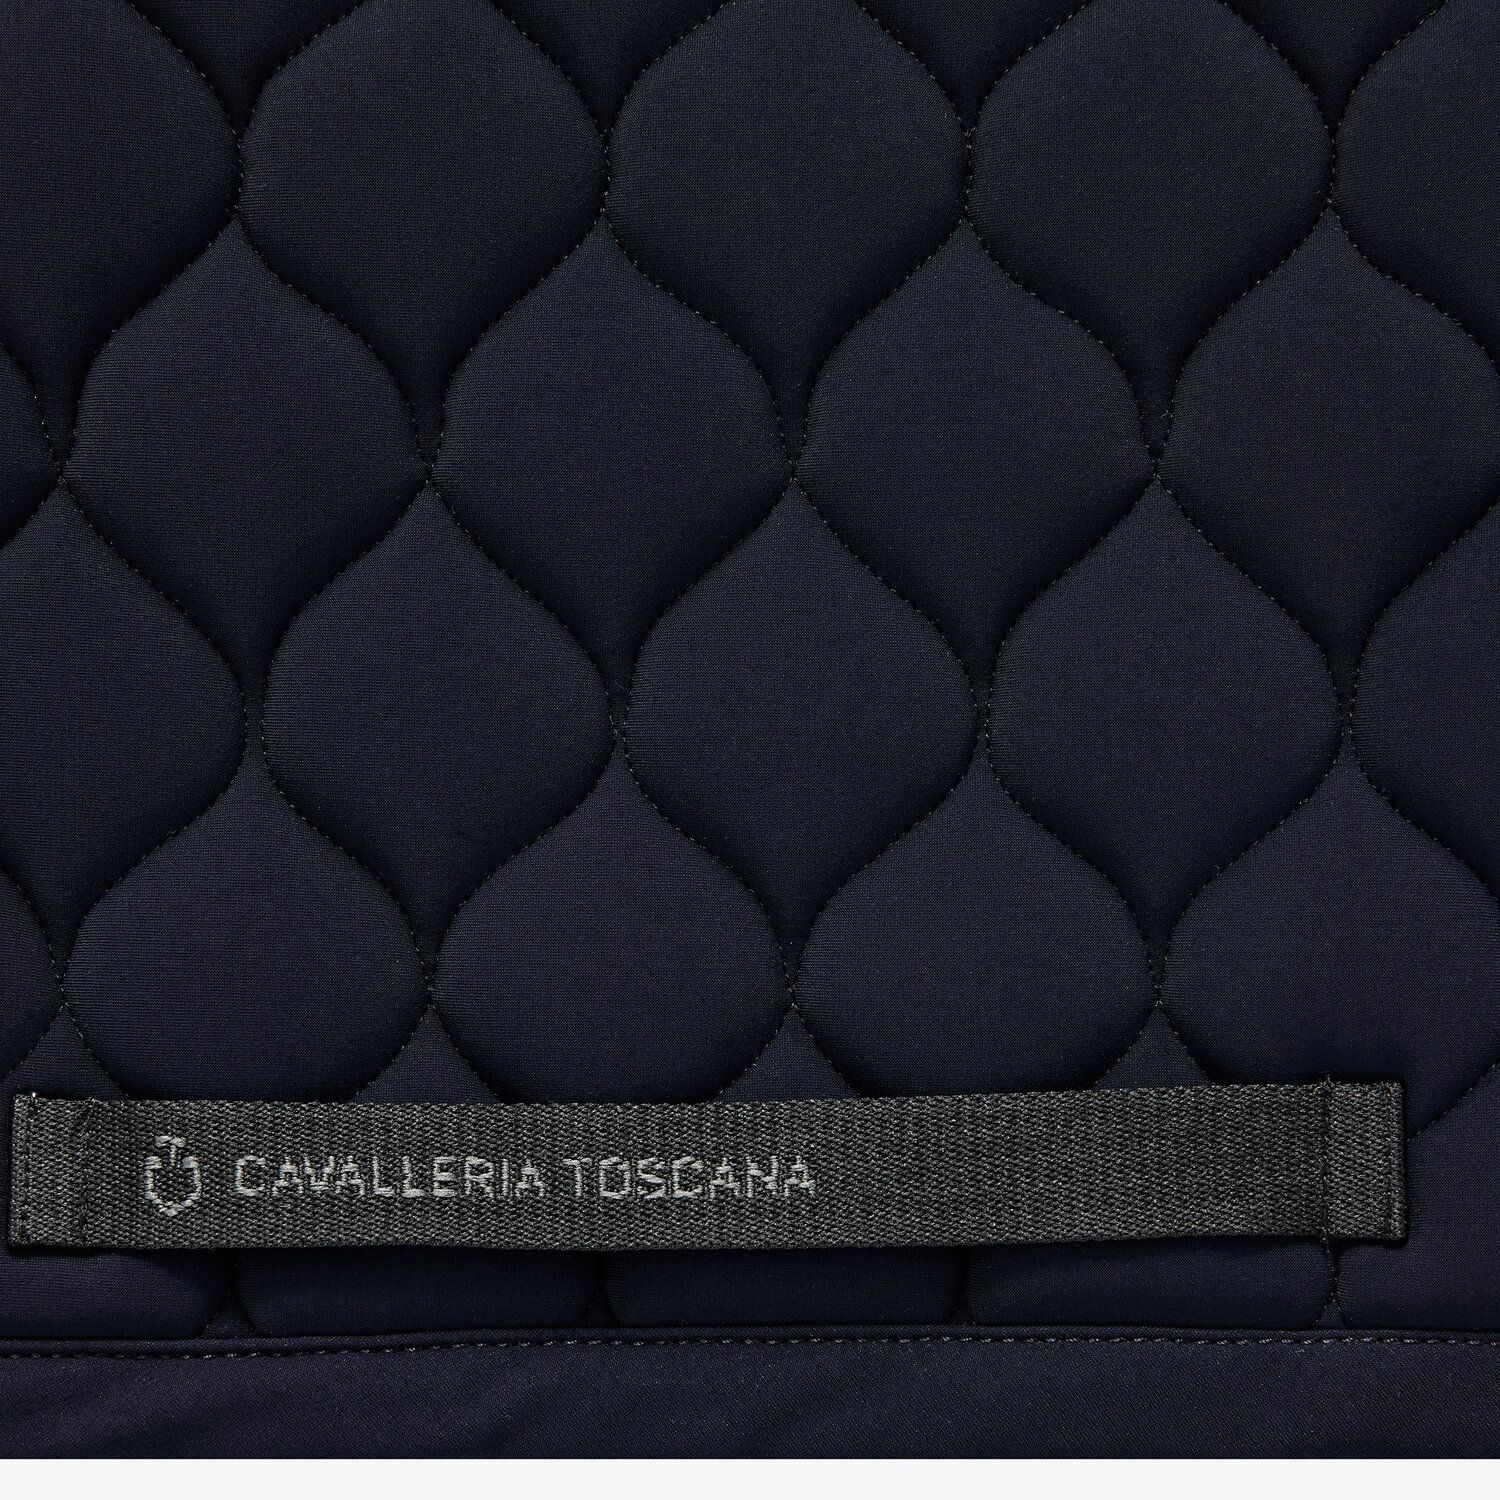 CT Circular Quilted Jersey Dressage Saddle Pad navy